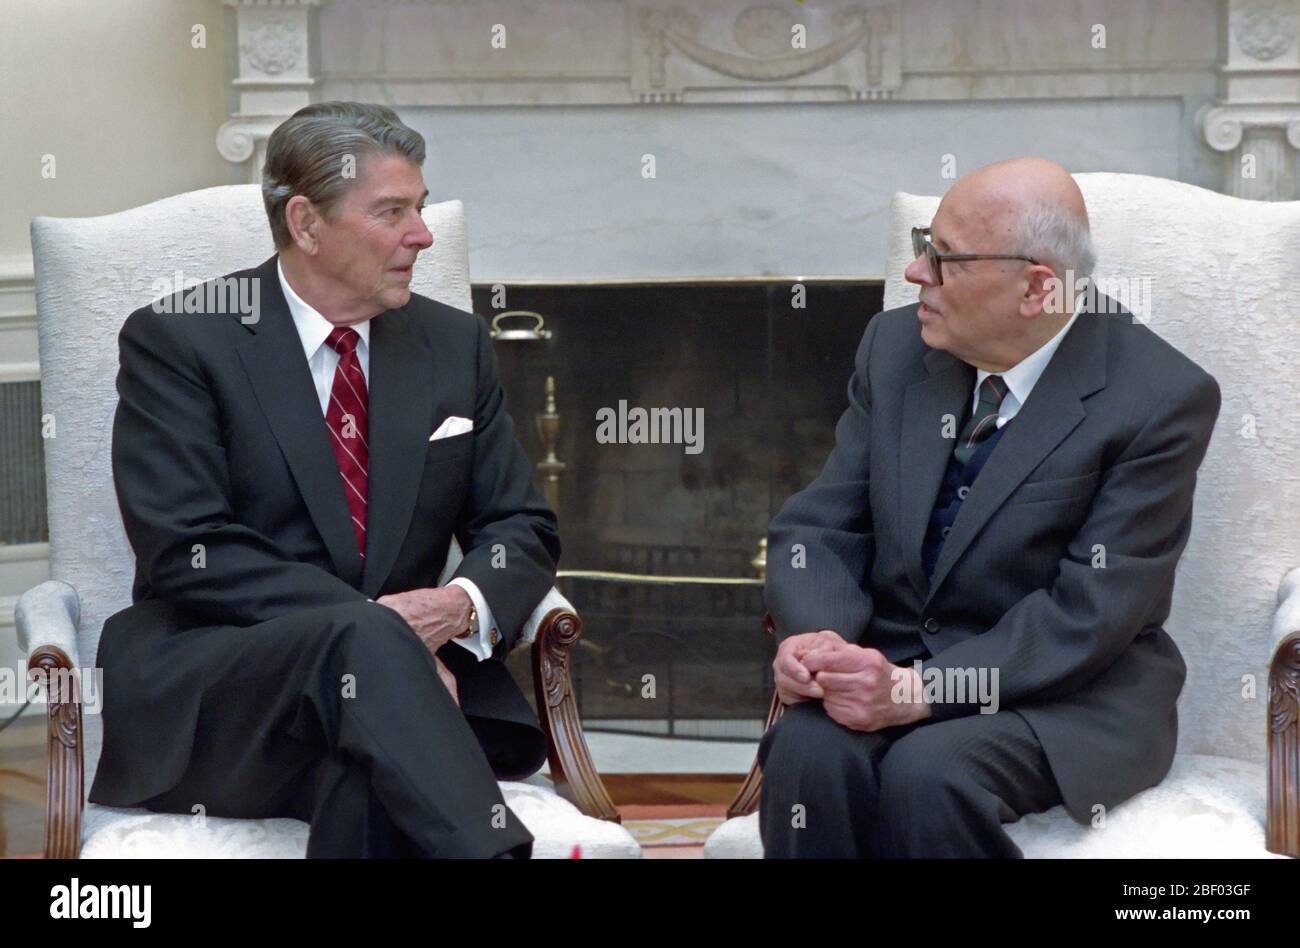 11/14/1988 President Reagan Meeting with Soviet dissident Andrei Sakharov in Oval Office Stock Photo